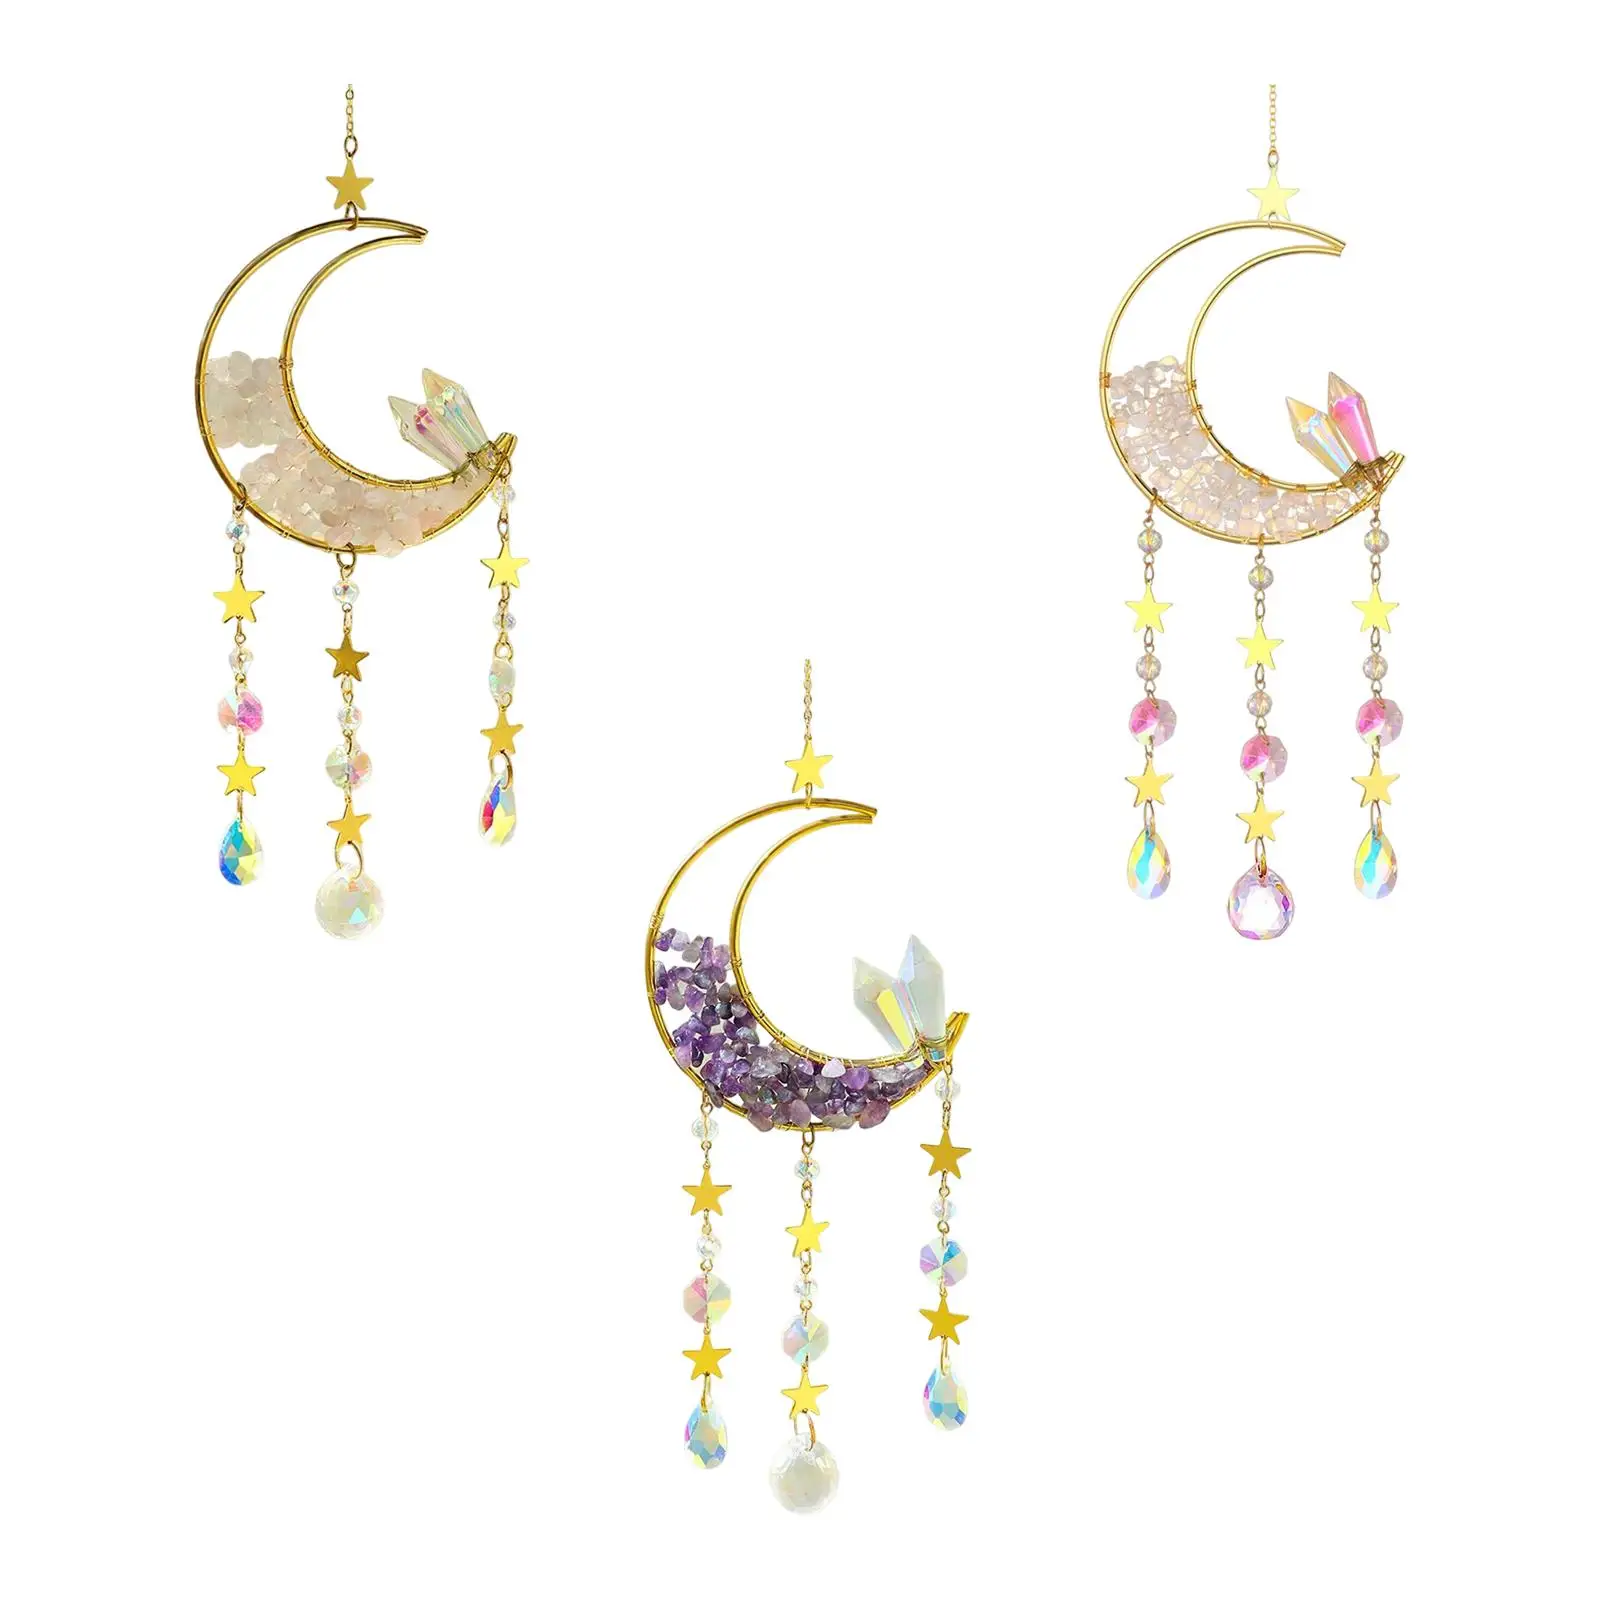 Moon Pendant Rainbow Maker Wind Chime Hanging Ornament for Bedroom Car Window